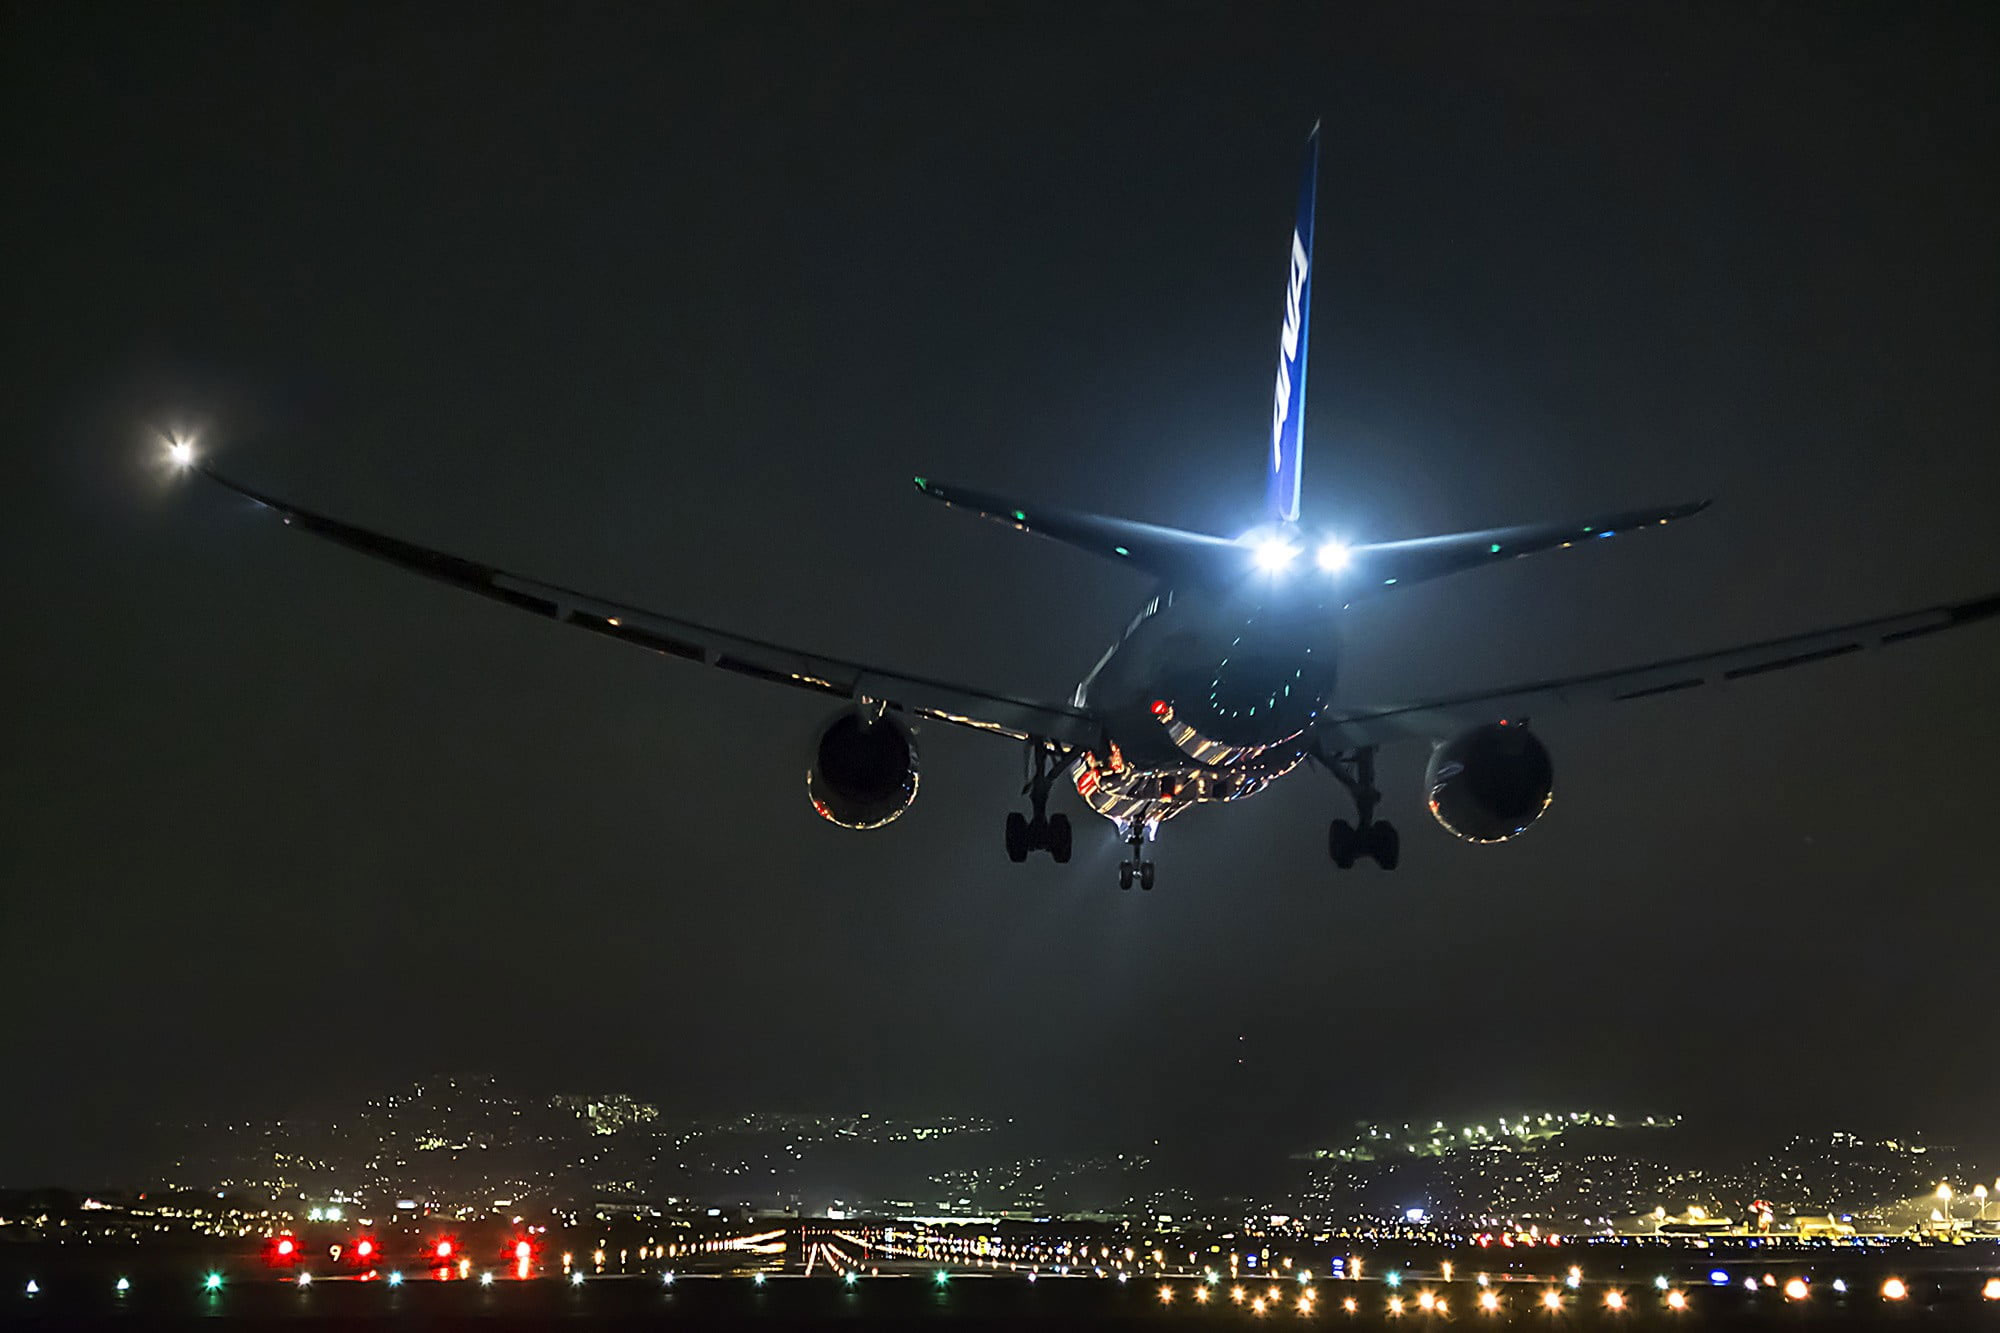 Wallpaper Boeing, Airplane, Aircraft, Night, Airport